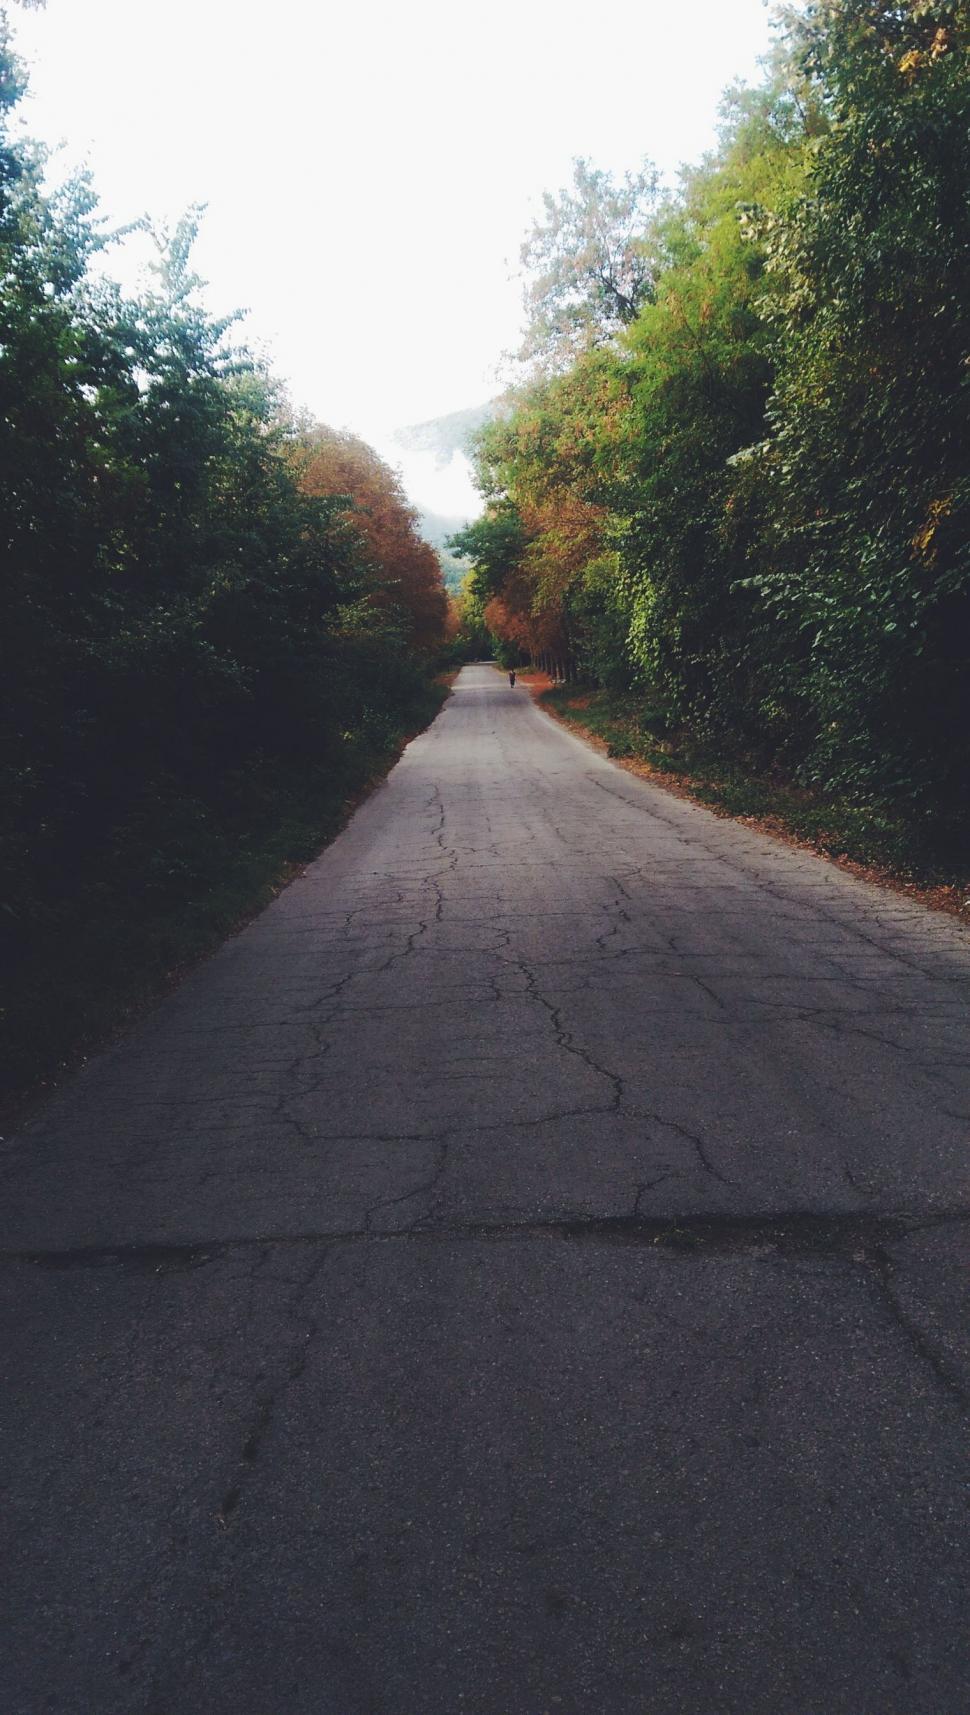 Free Image of Empty Road Surrounded by Trees and Bushes 